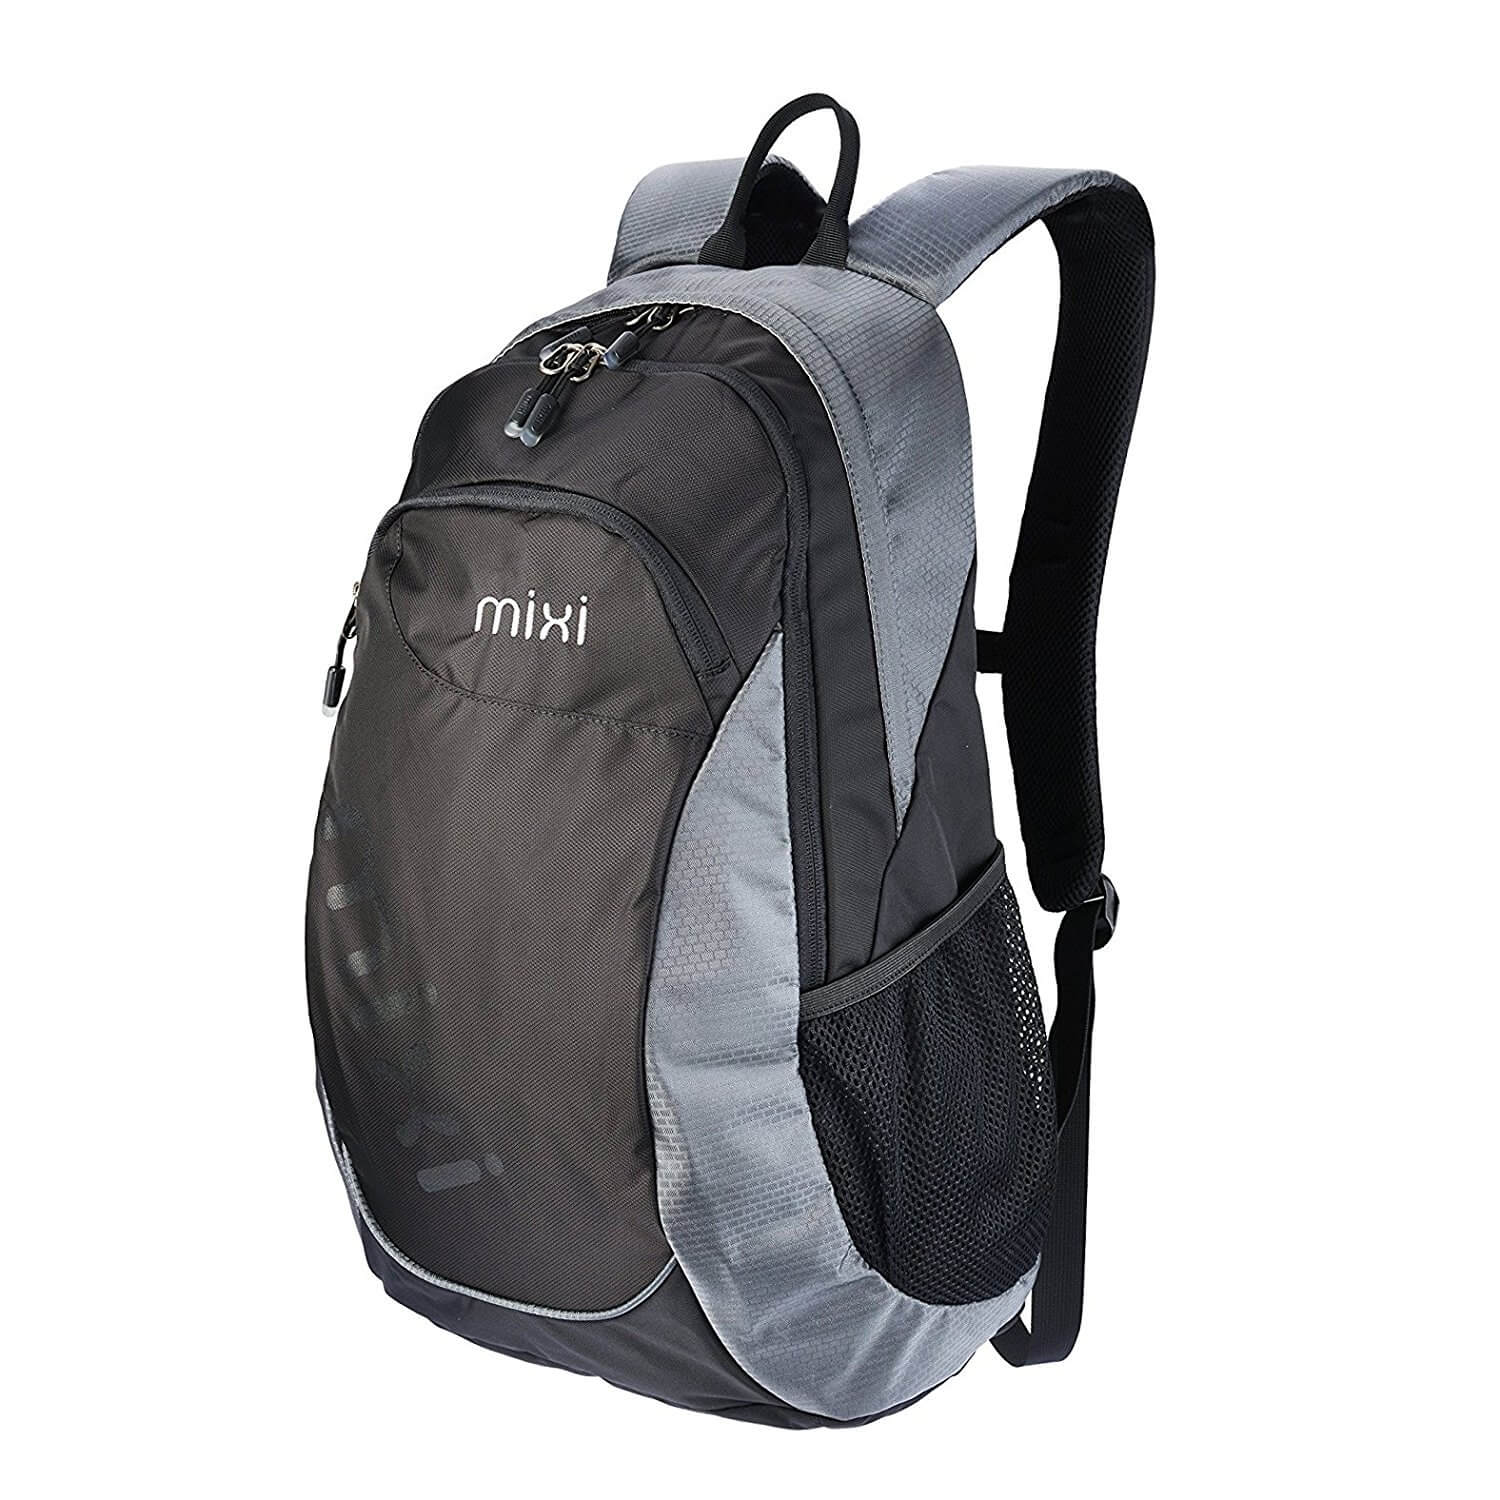 Mixi Lightweight Water Resistant Backpack